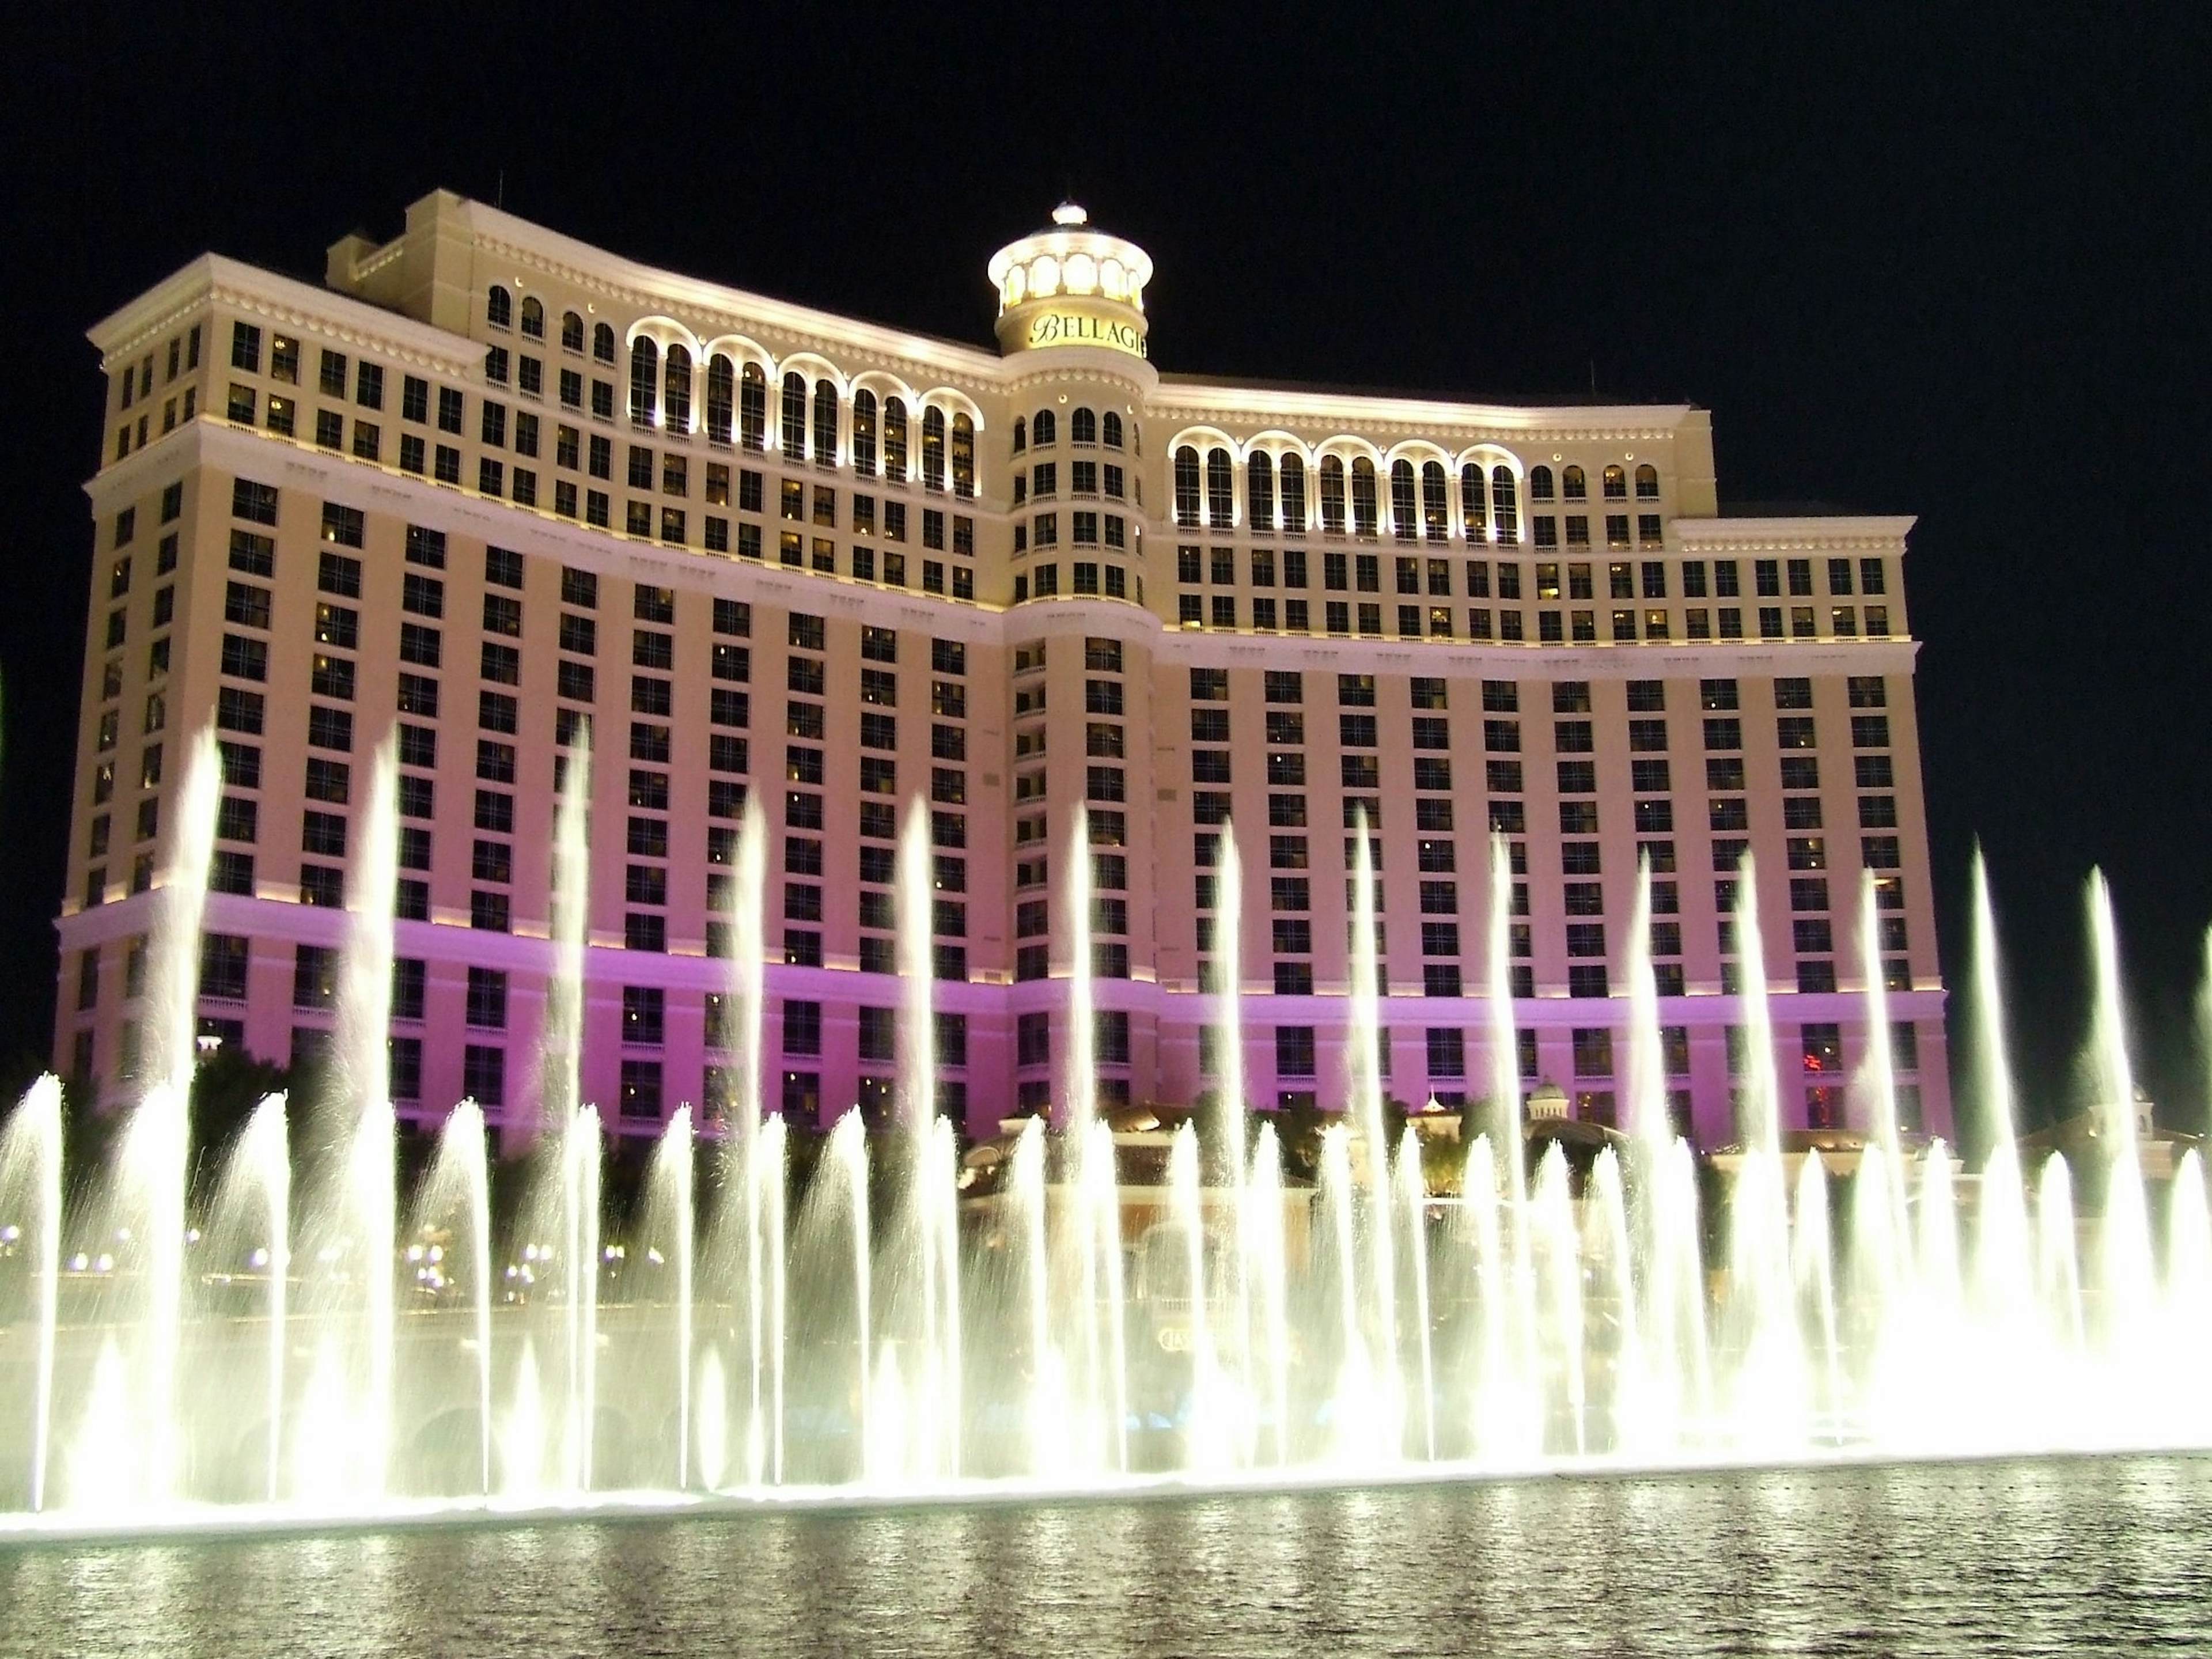 The Fountains at Bellagio